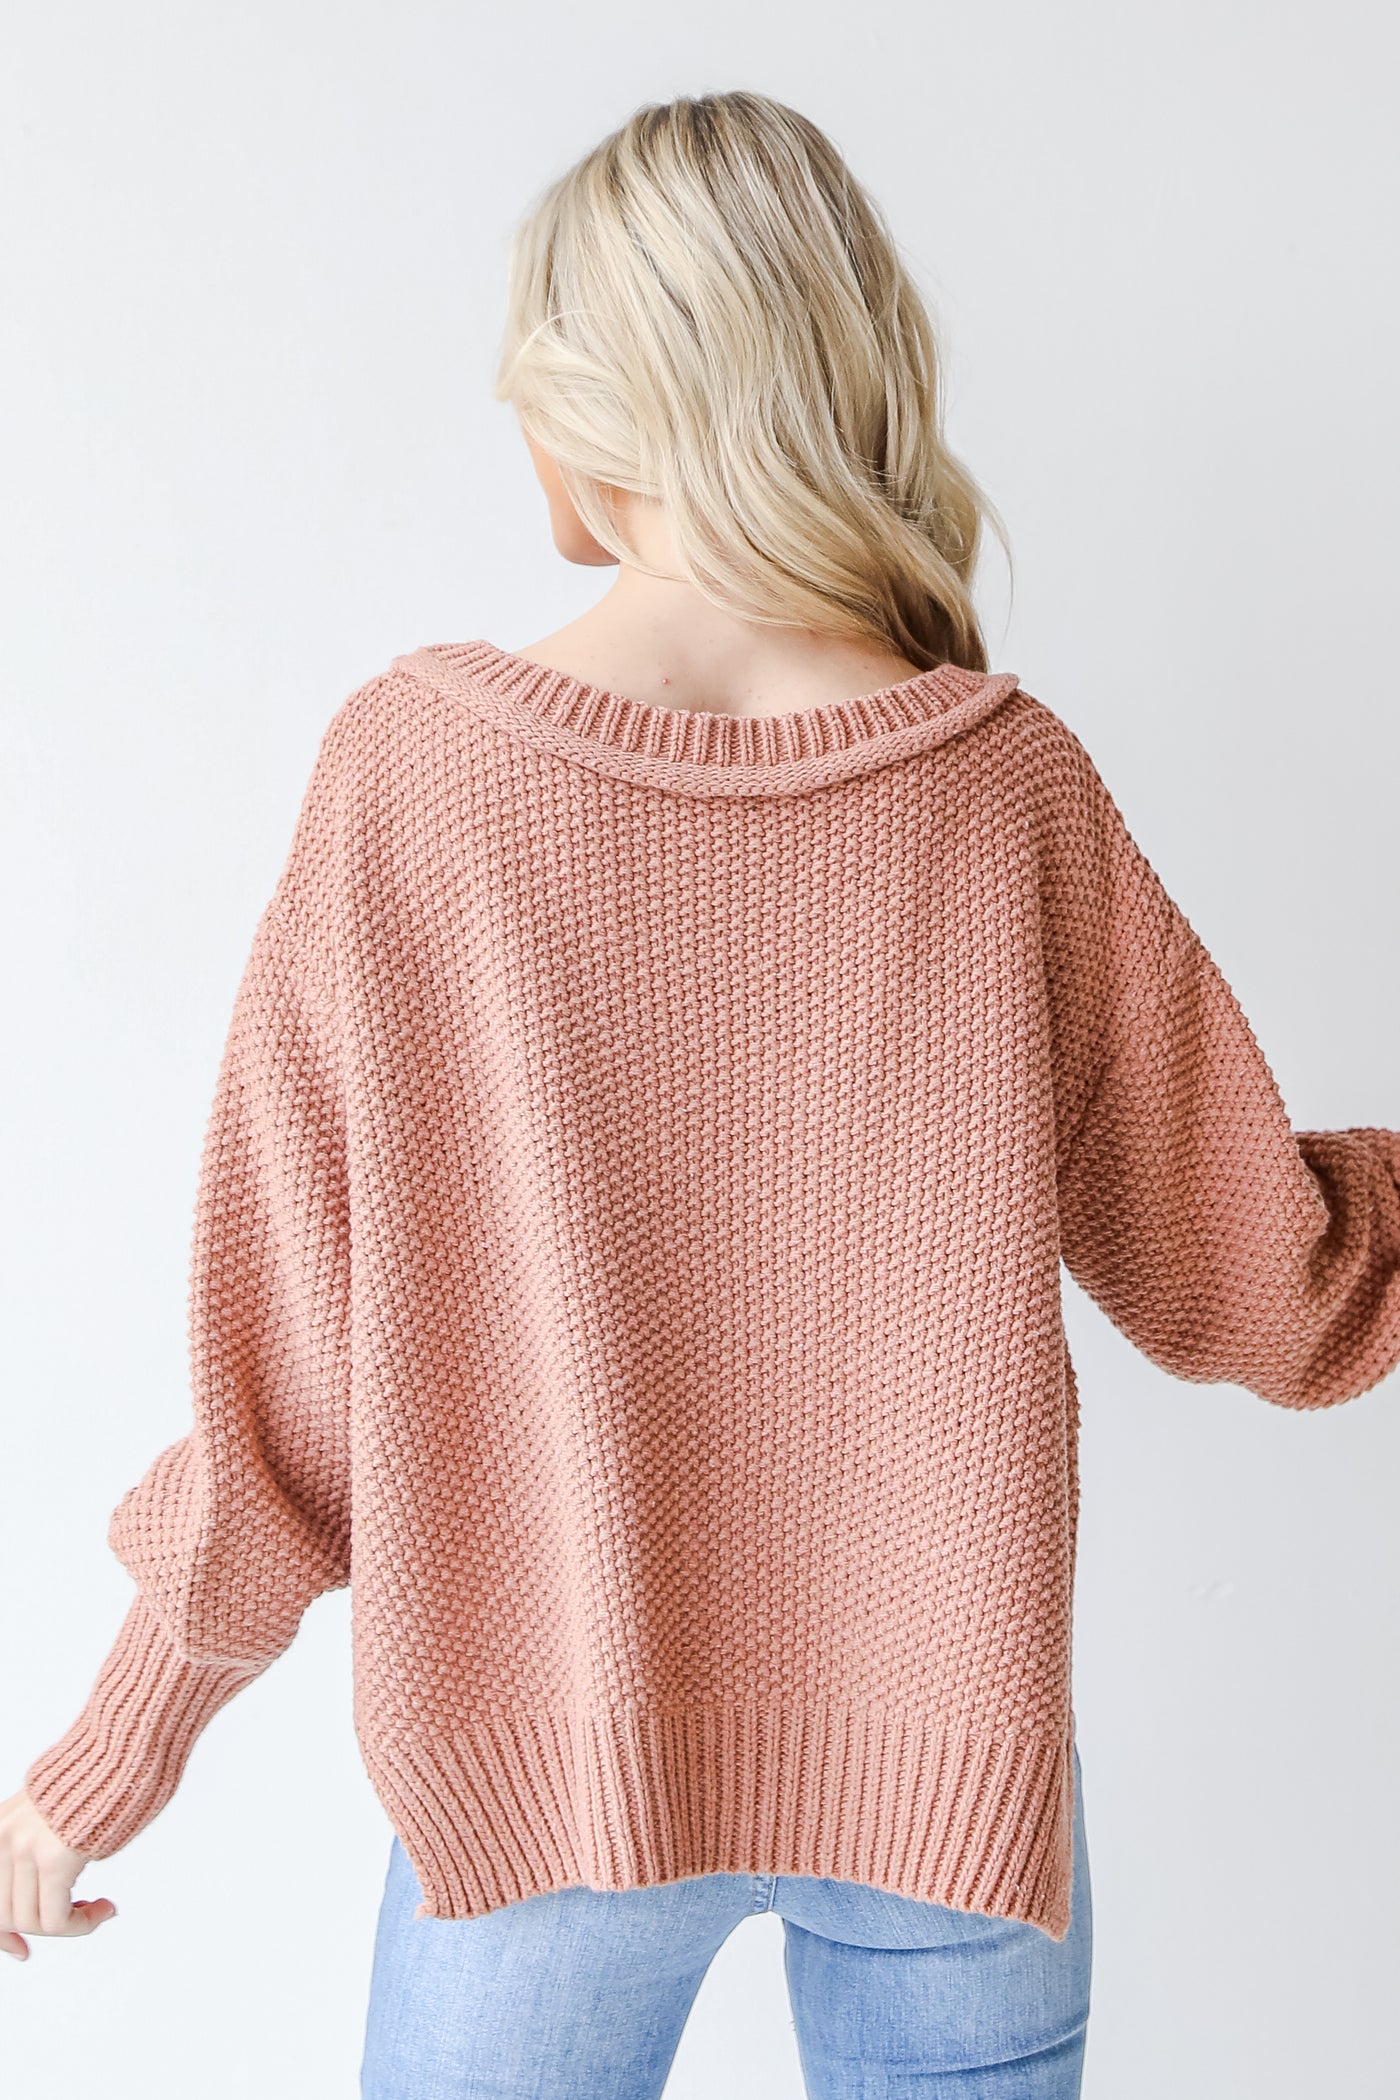 Sweater in rust back view